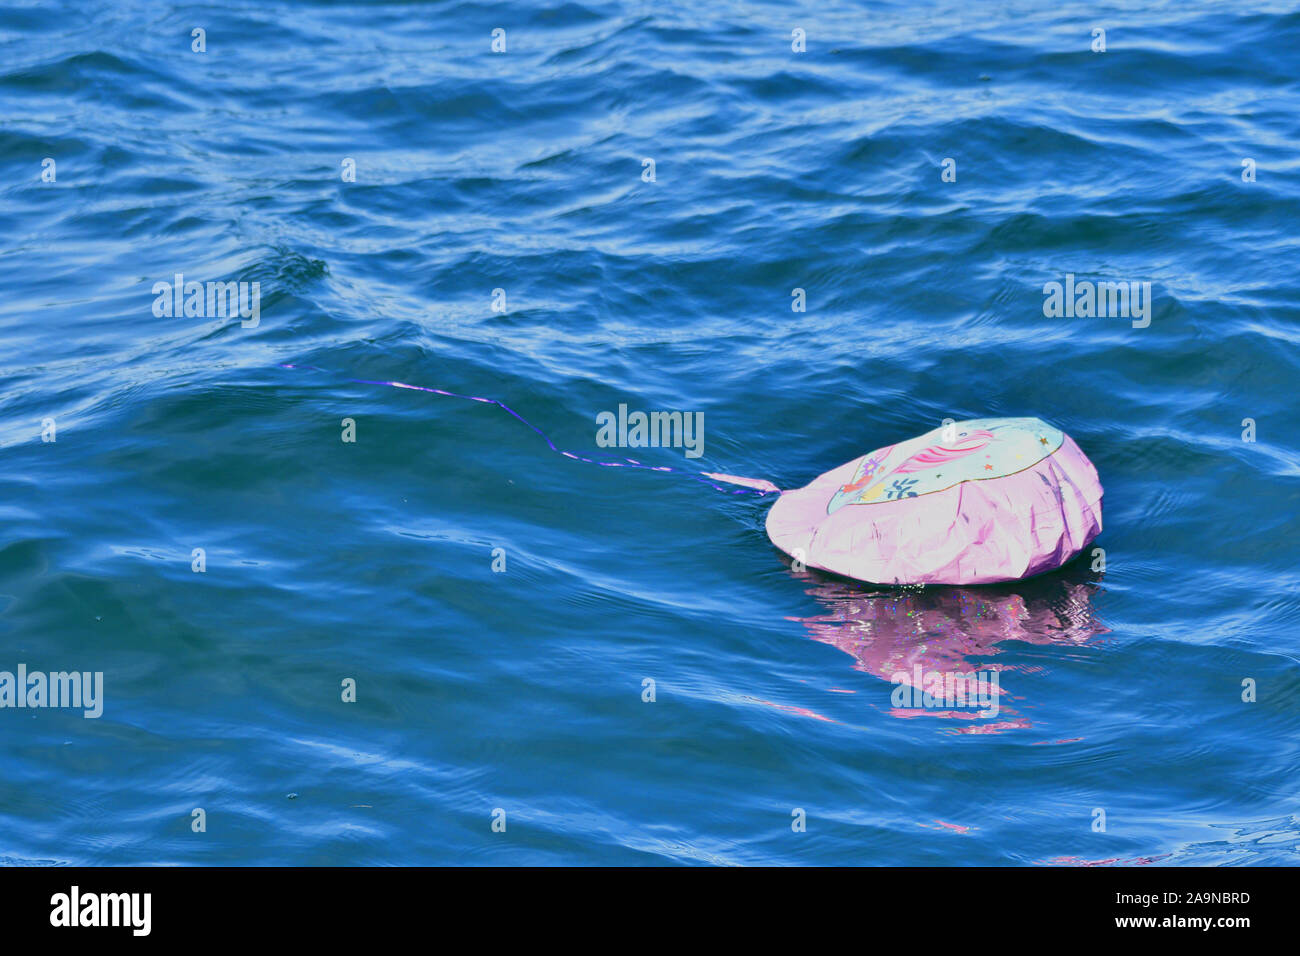 A Floating Balloon in the middle of the ocean Stock Photo